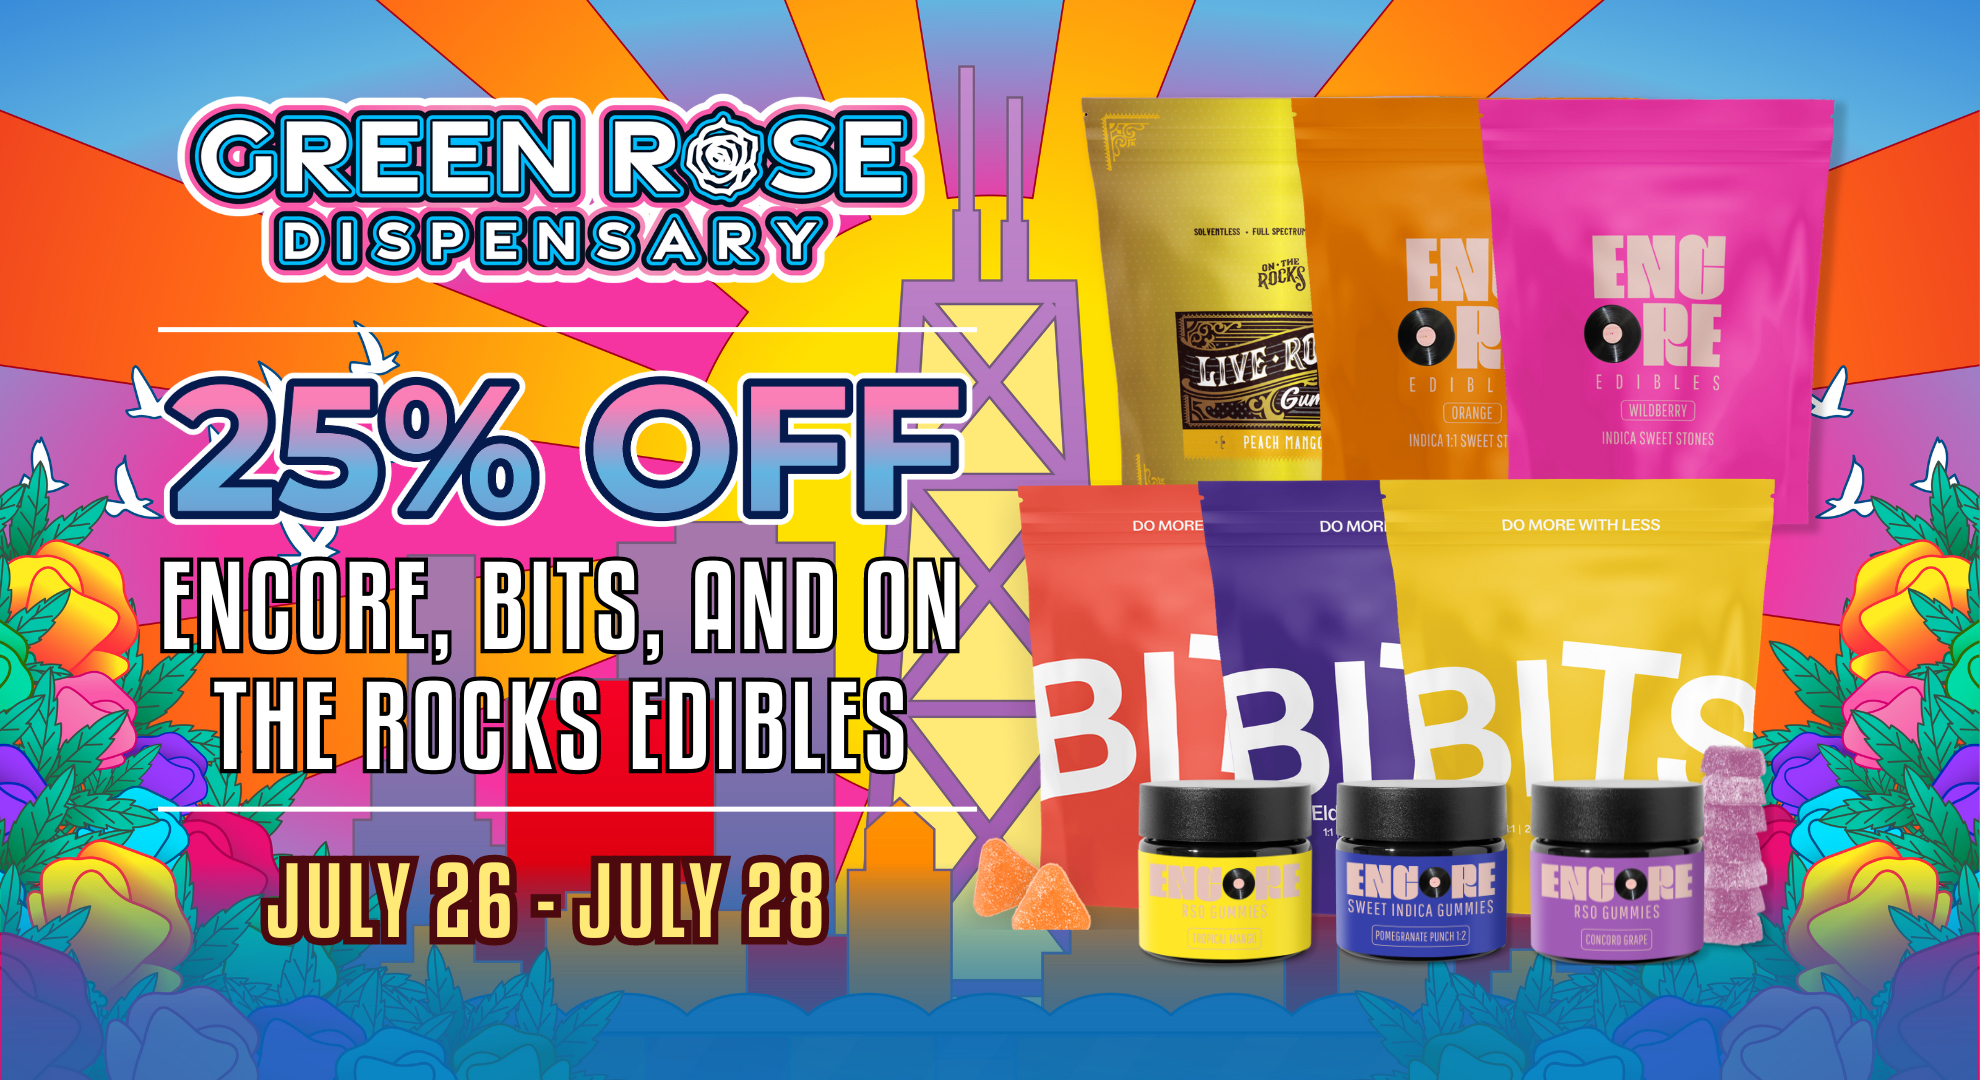 Cannabis Promo, Cannabis Sales, Cannabis Discounts, Cannabis on Sale, 25% Off Encore, Bits, and On the Rocks Edibles!!